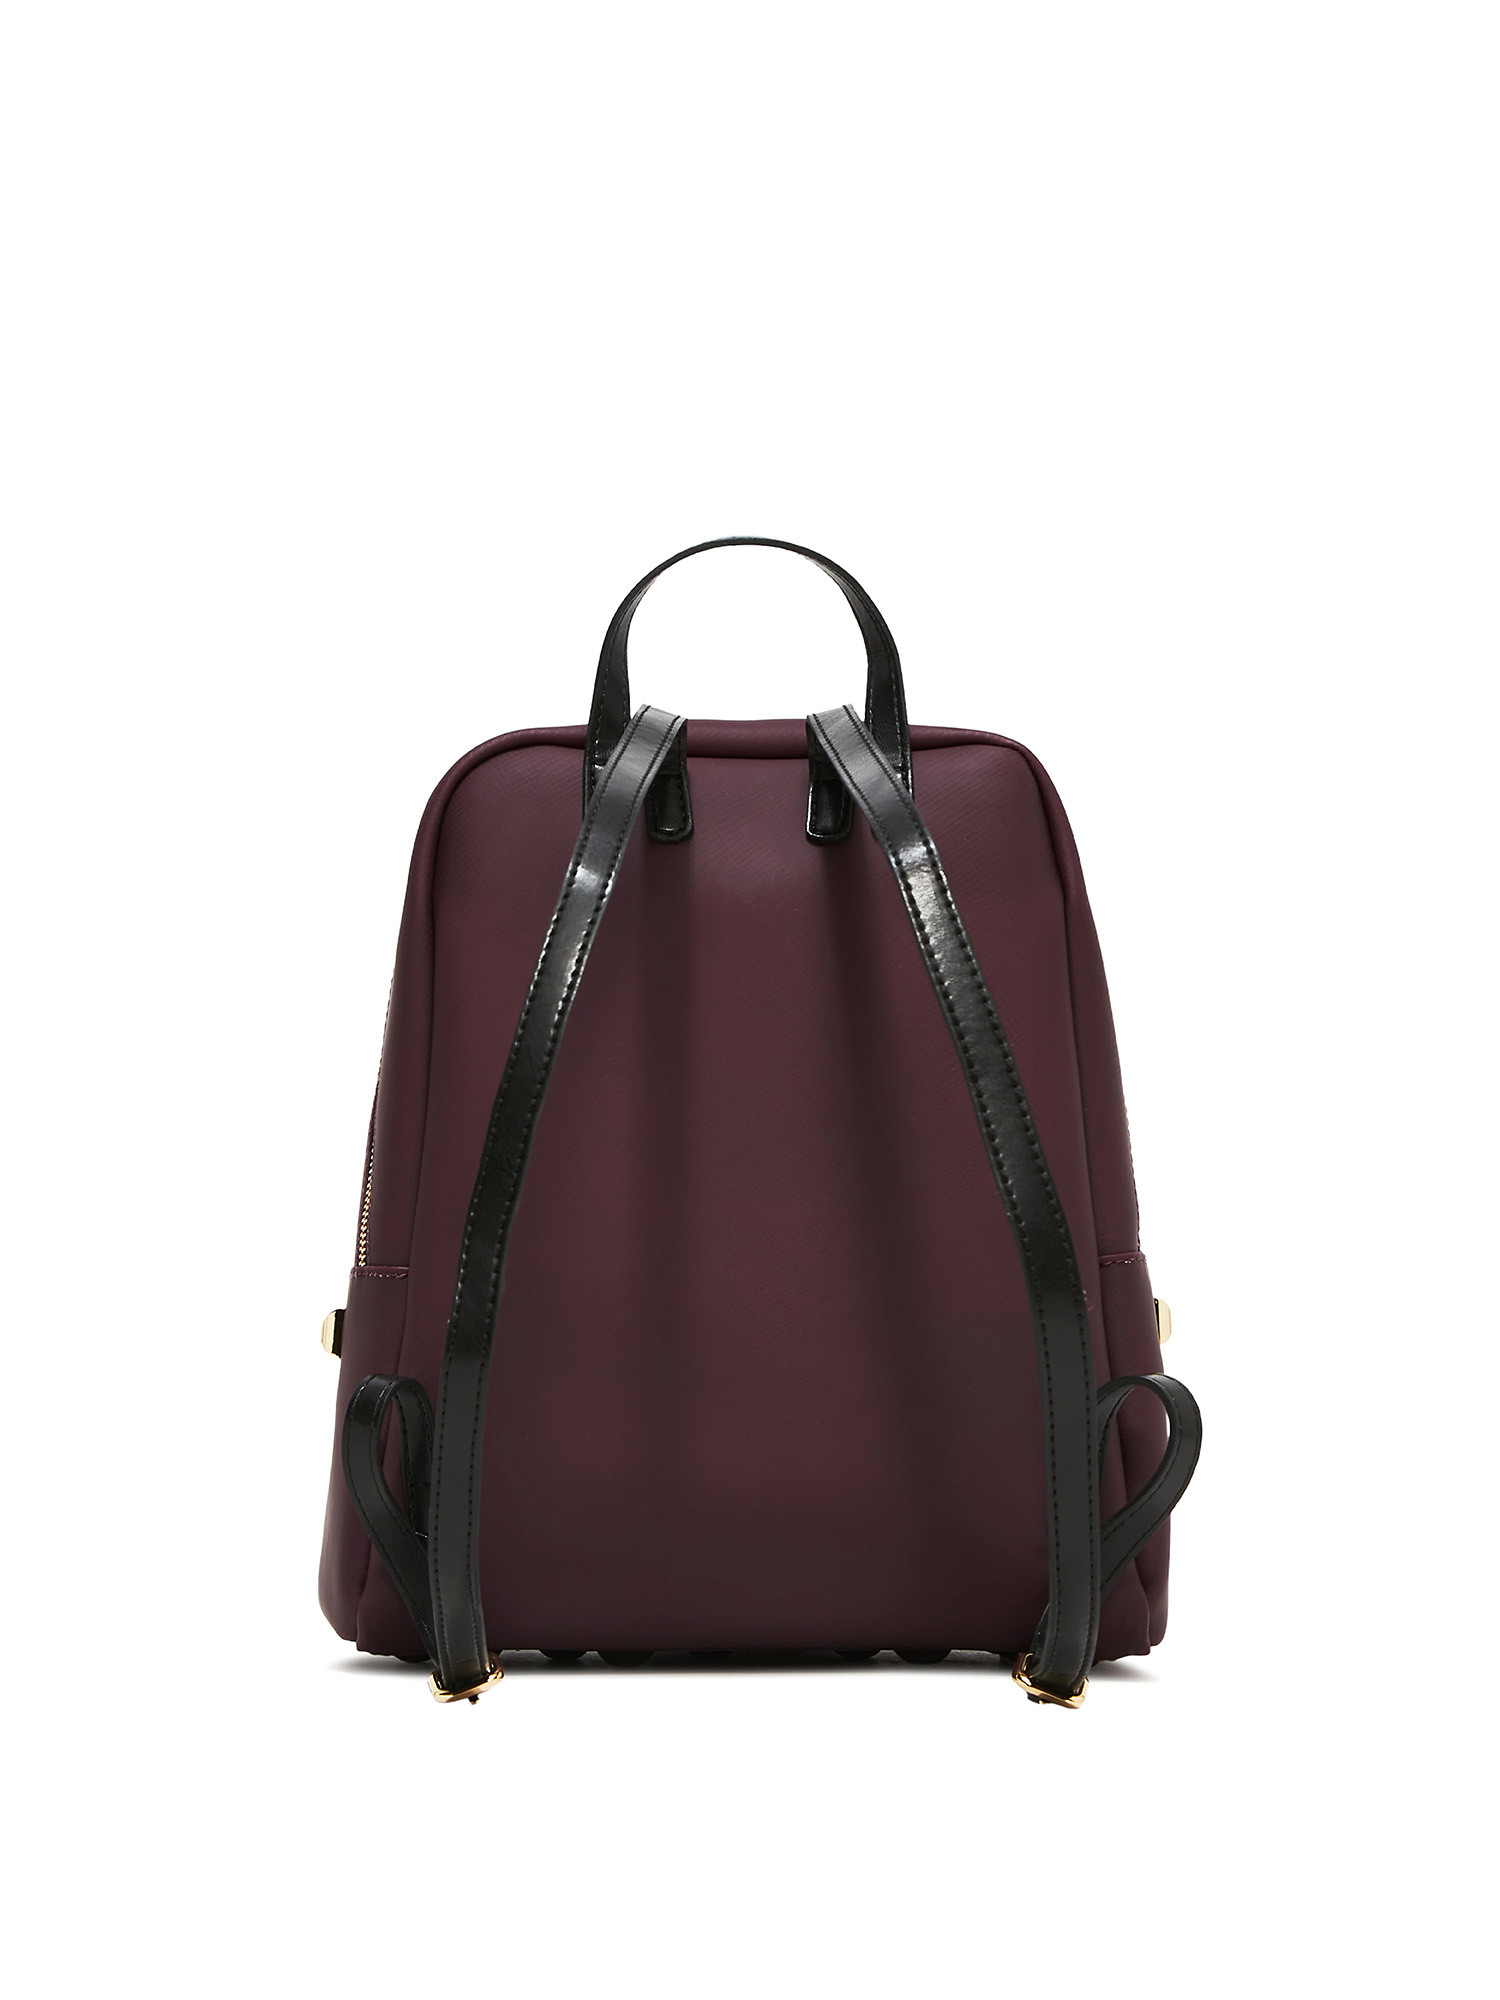 Medium Maxi Studs backpack, Red Bordeaux, large image number 1